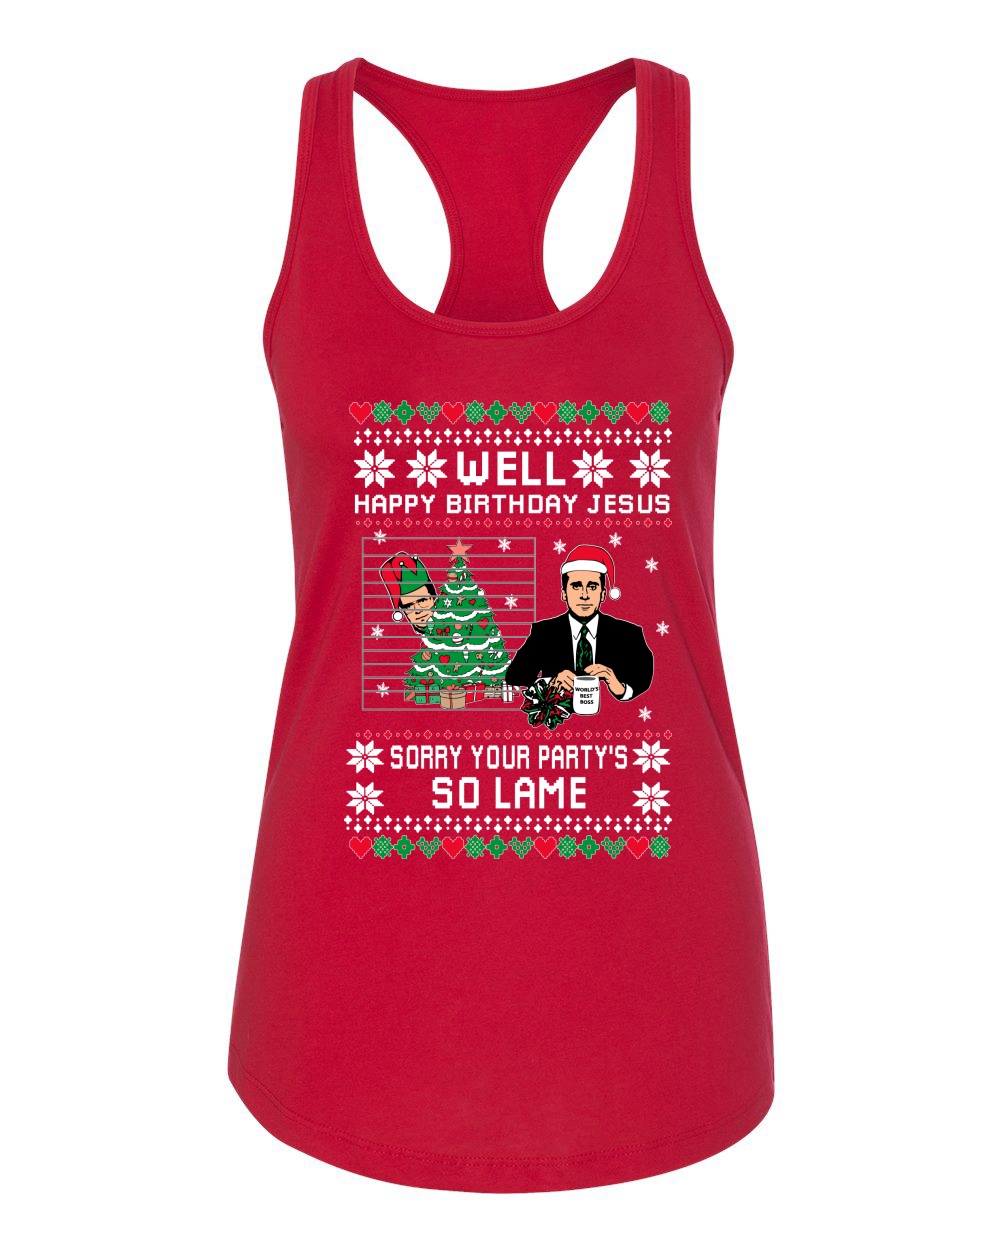 Wild Bobby Well Happy Birthday Jesus Funny Quote Office Ugly Christmas Ladies Racerback Tank Top, Red, Medium - image 2 of 3